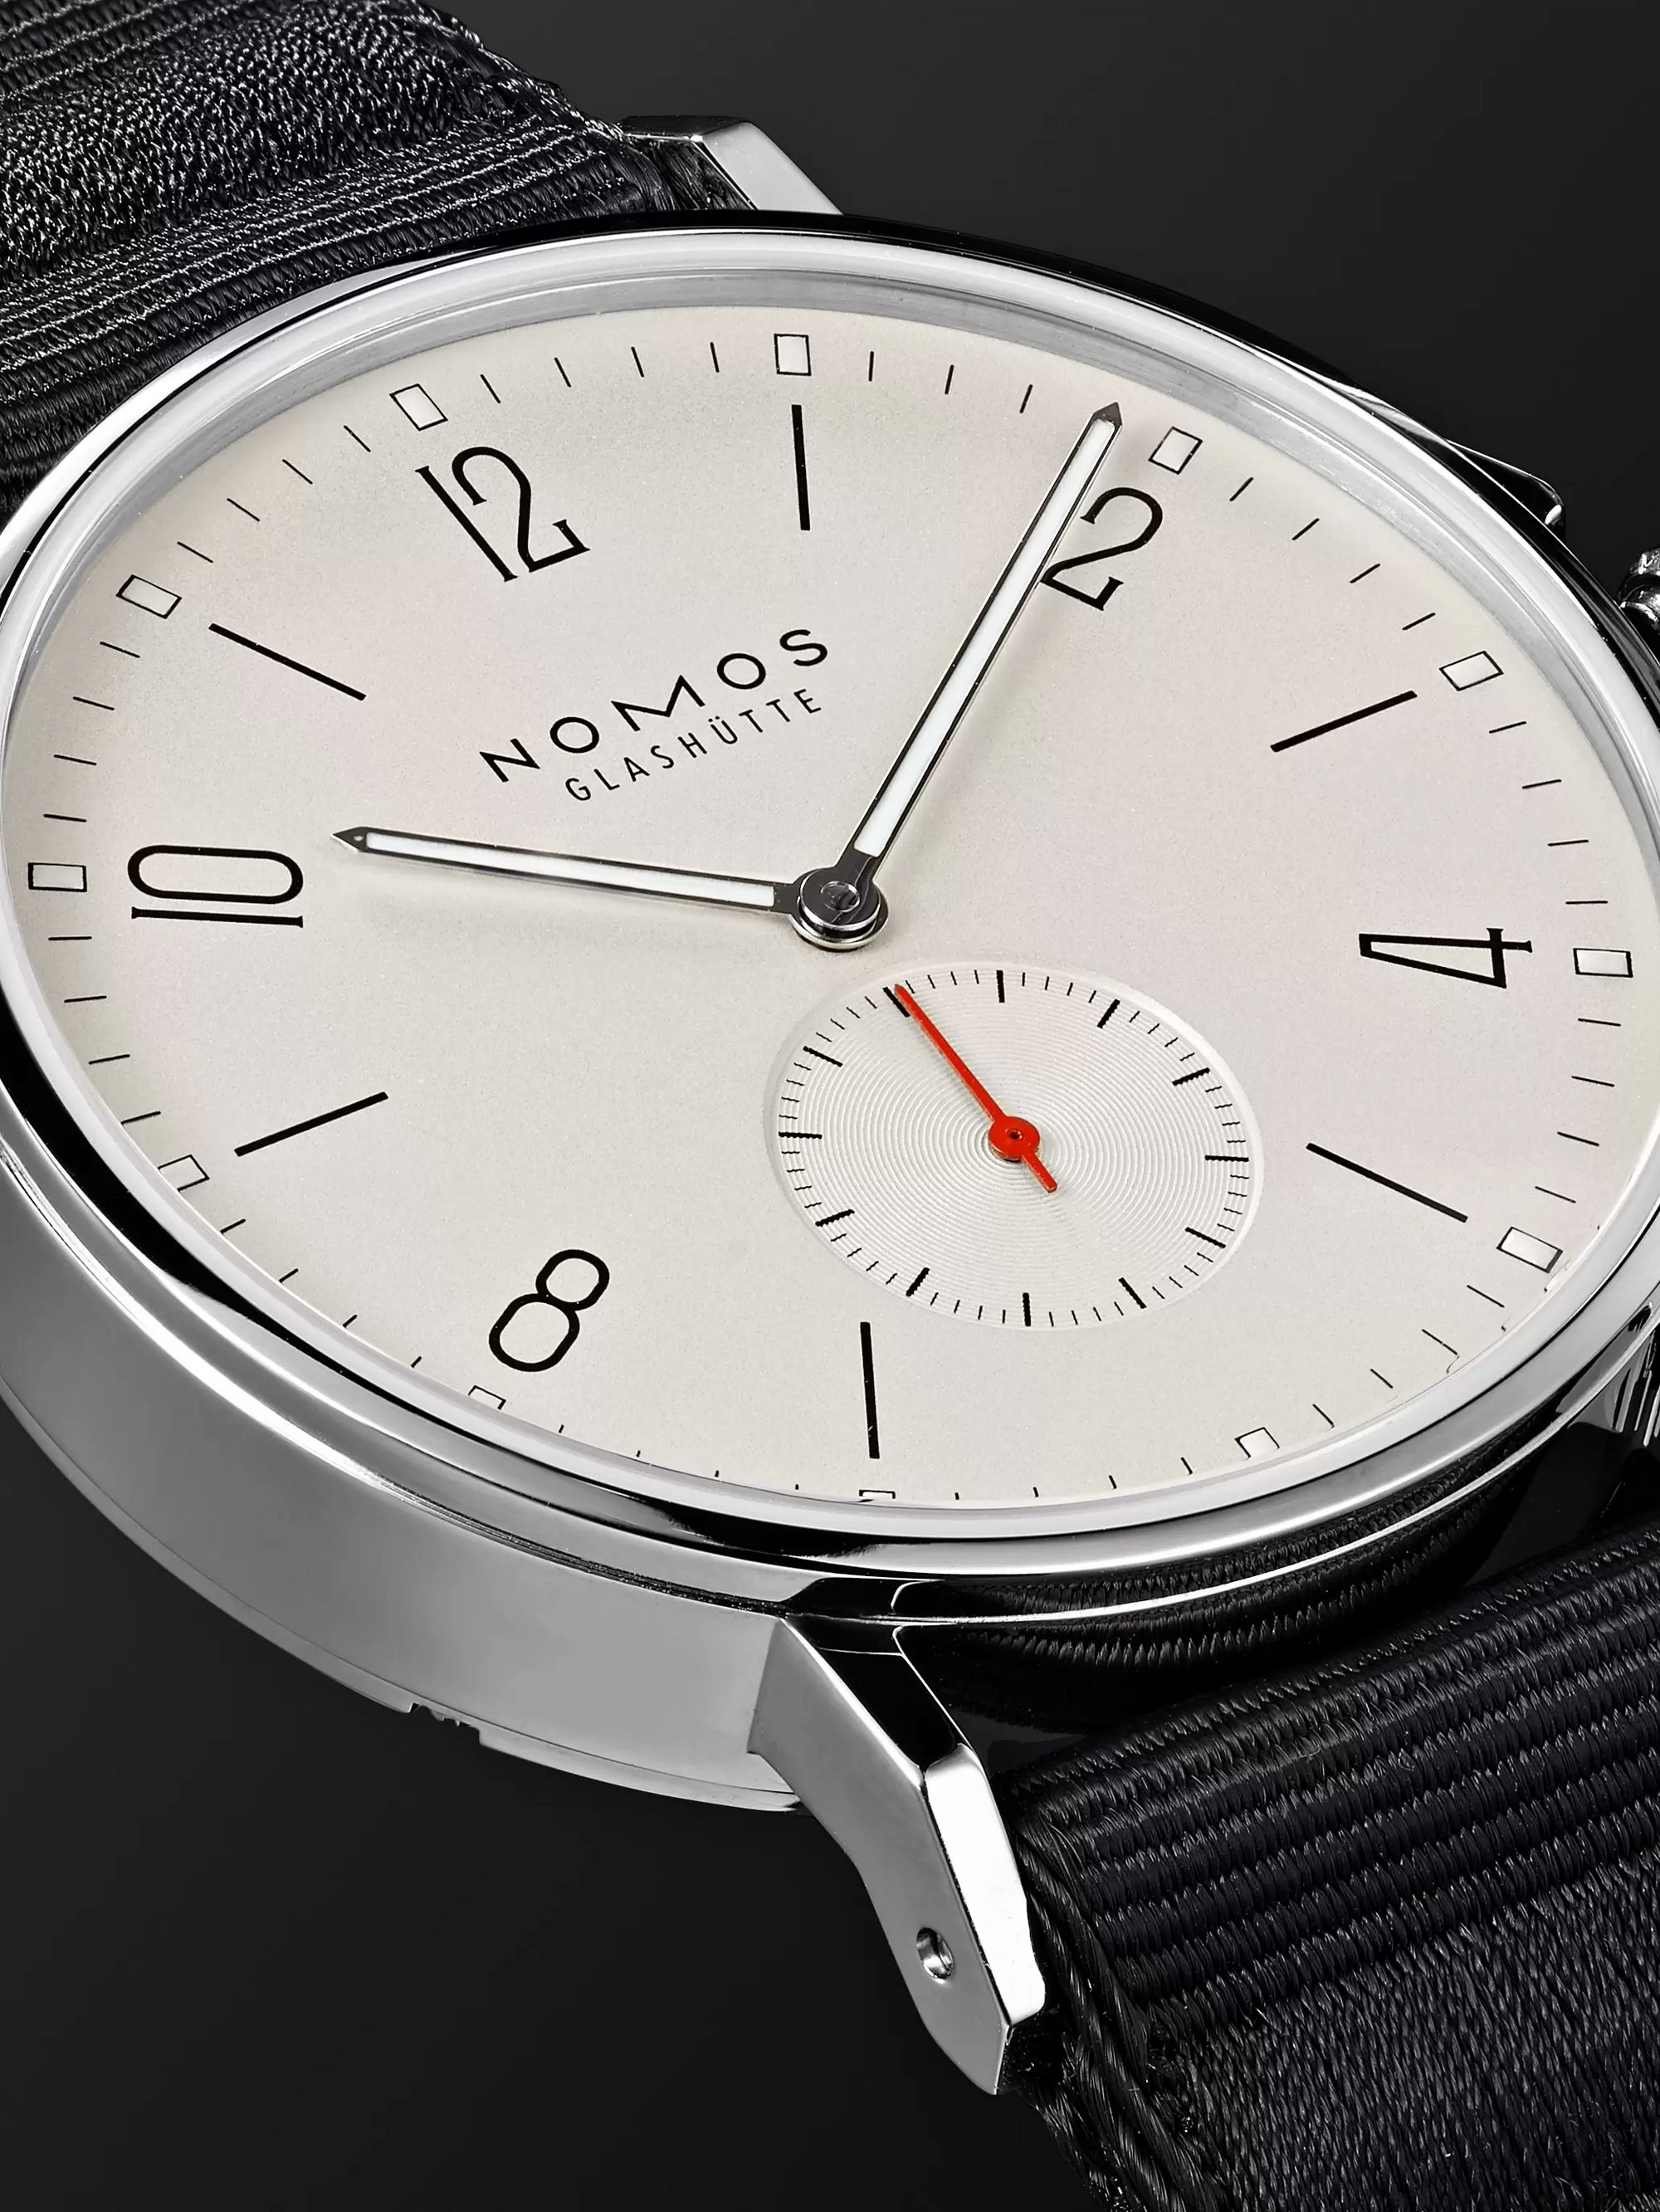 NOMOS GLASHÜTTE Ahoi Automatic 40mm Stainless Steel and Nylon Watch, Ref. No. 550